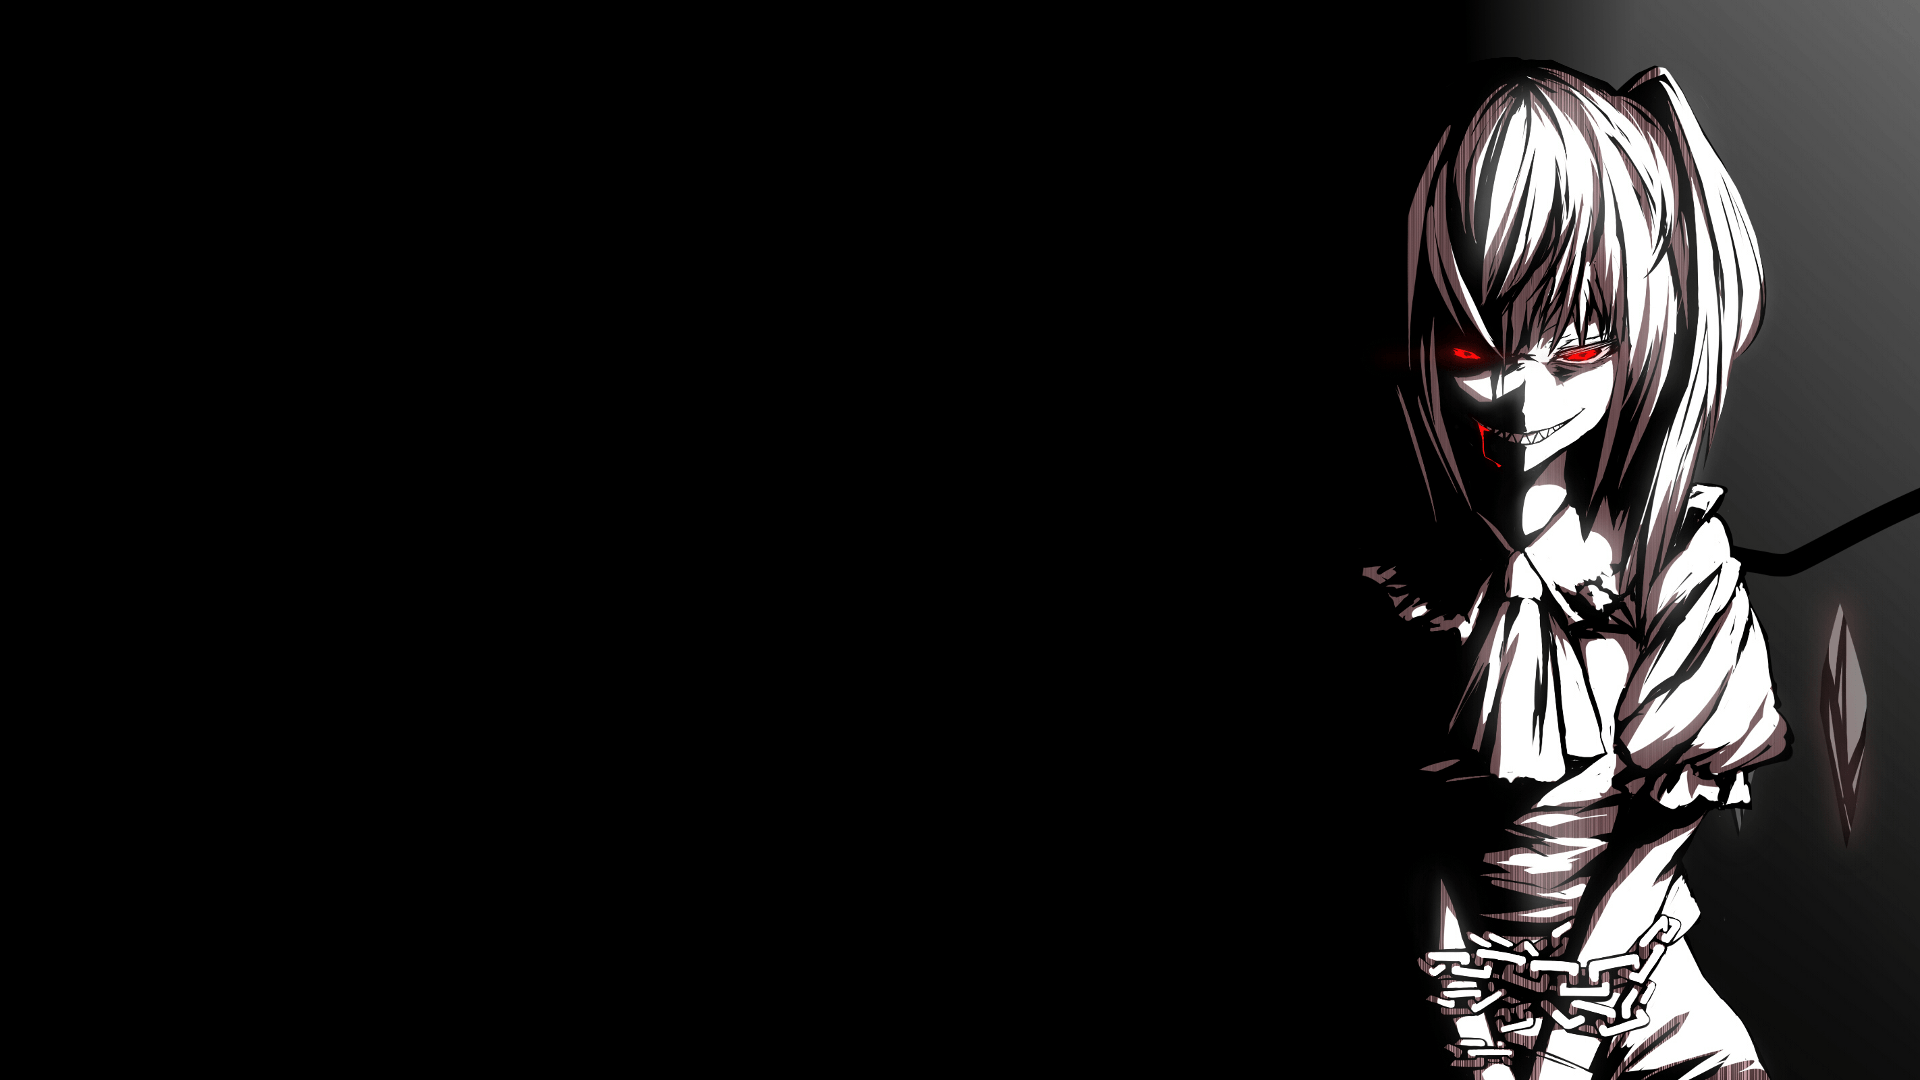 Horror Anime 1920x1080 Wallpapers - Wallpaper Cave